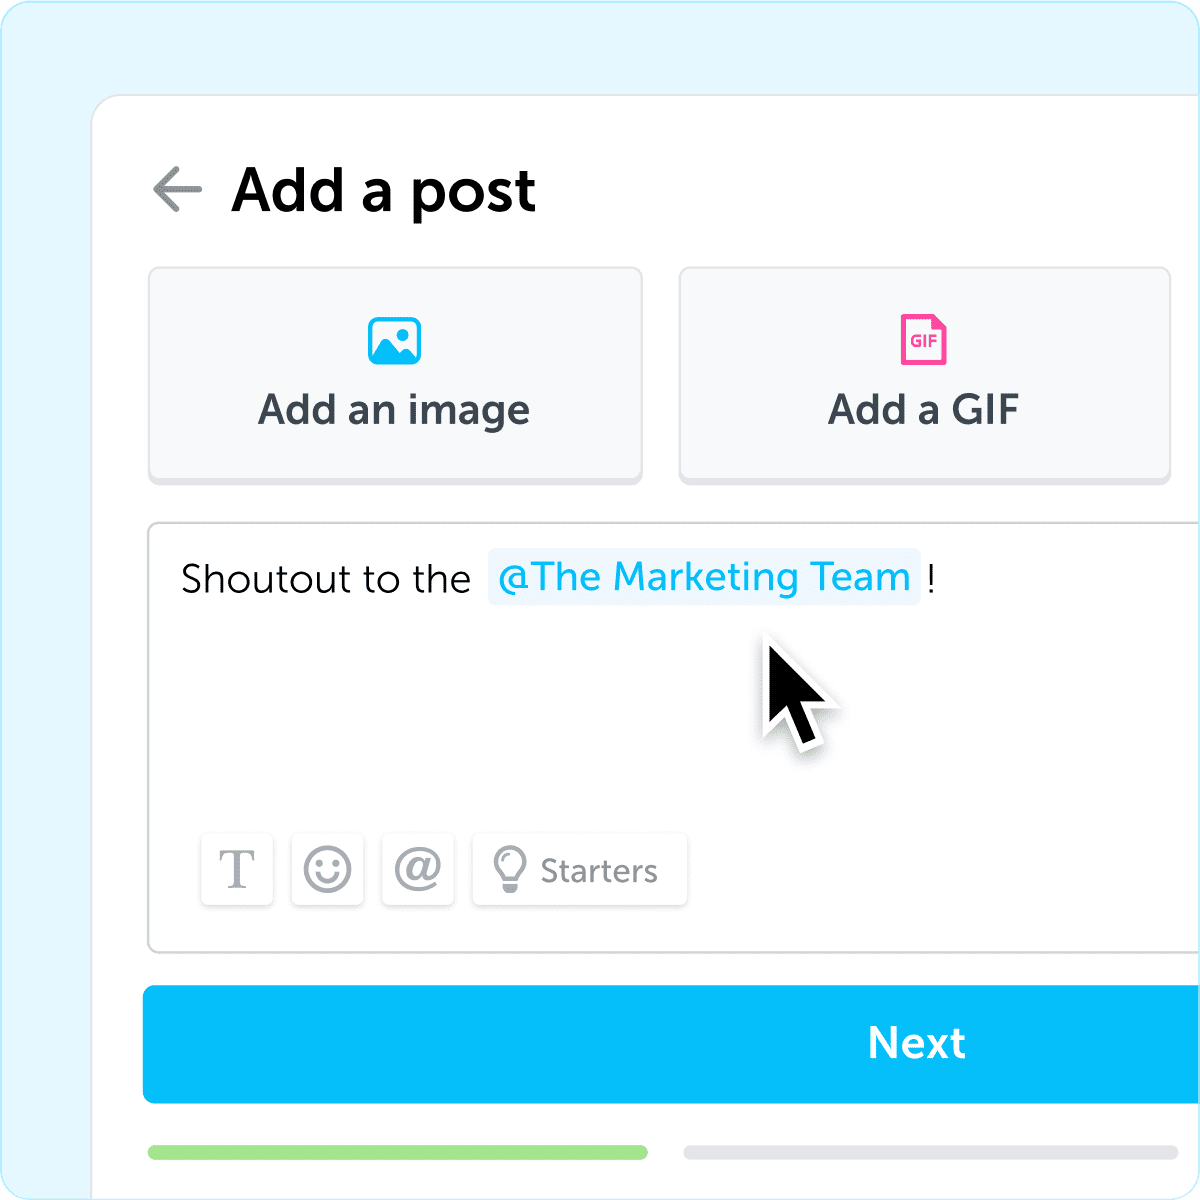 User mention in a text field when adding a post